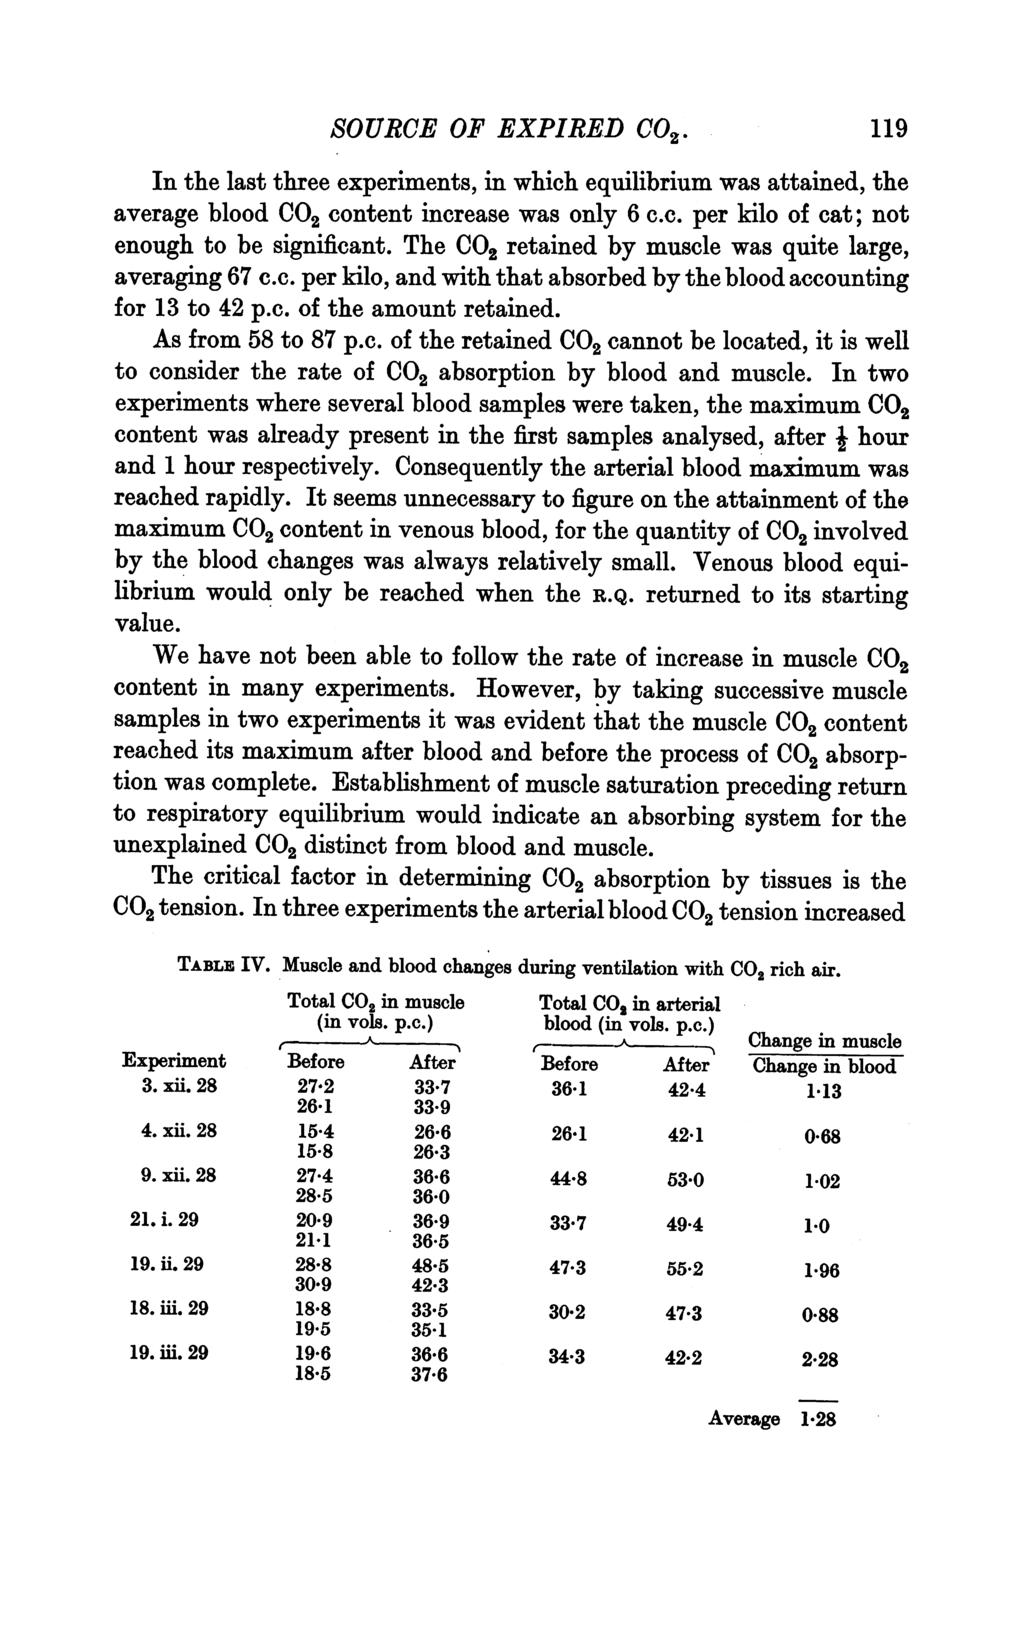 SOURCE OF EXPIRED CO. In the last three experiments, in which equilibrium was attained, the average blood C02 content increase was only 6 c.c. per kilo of cat; not enough to be significant.